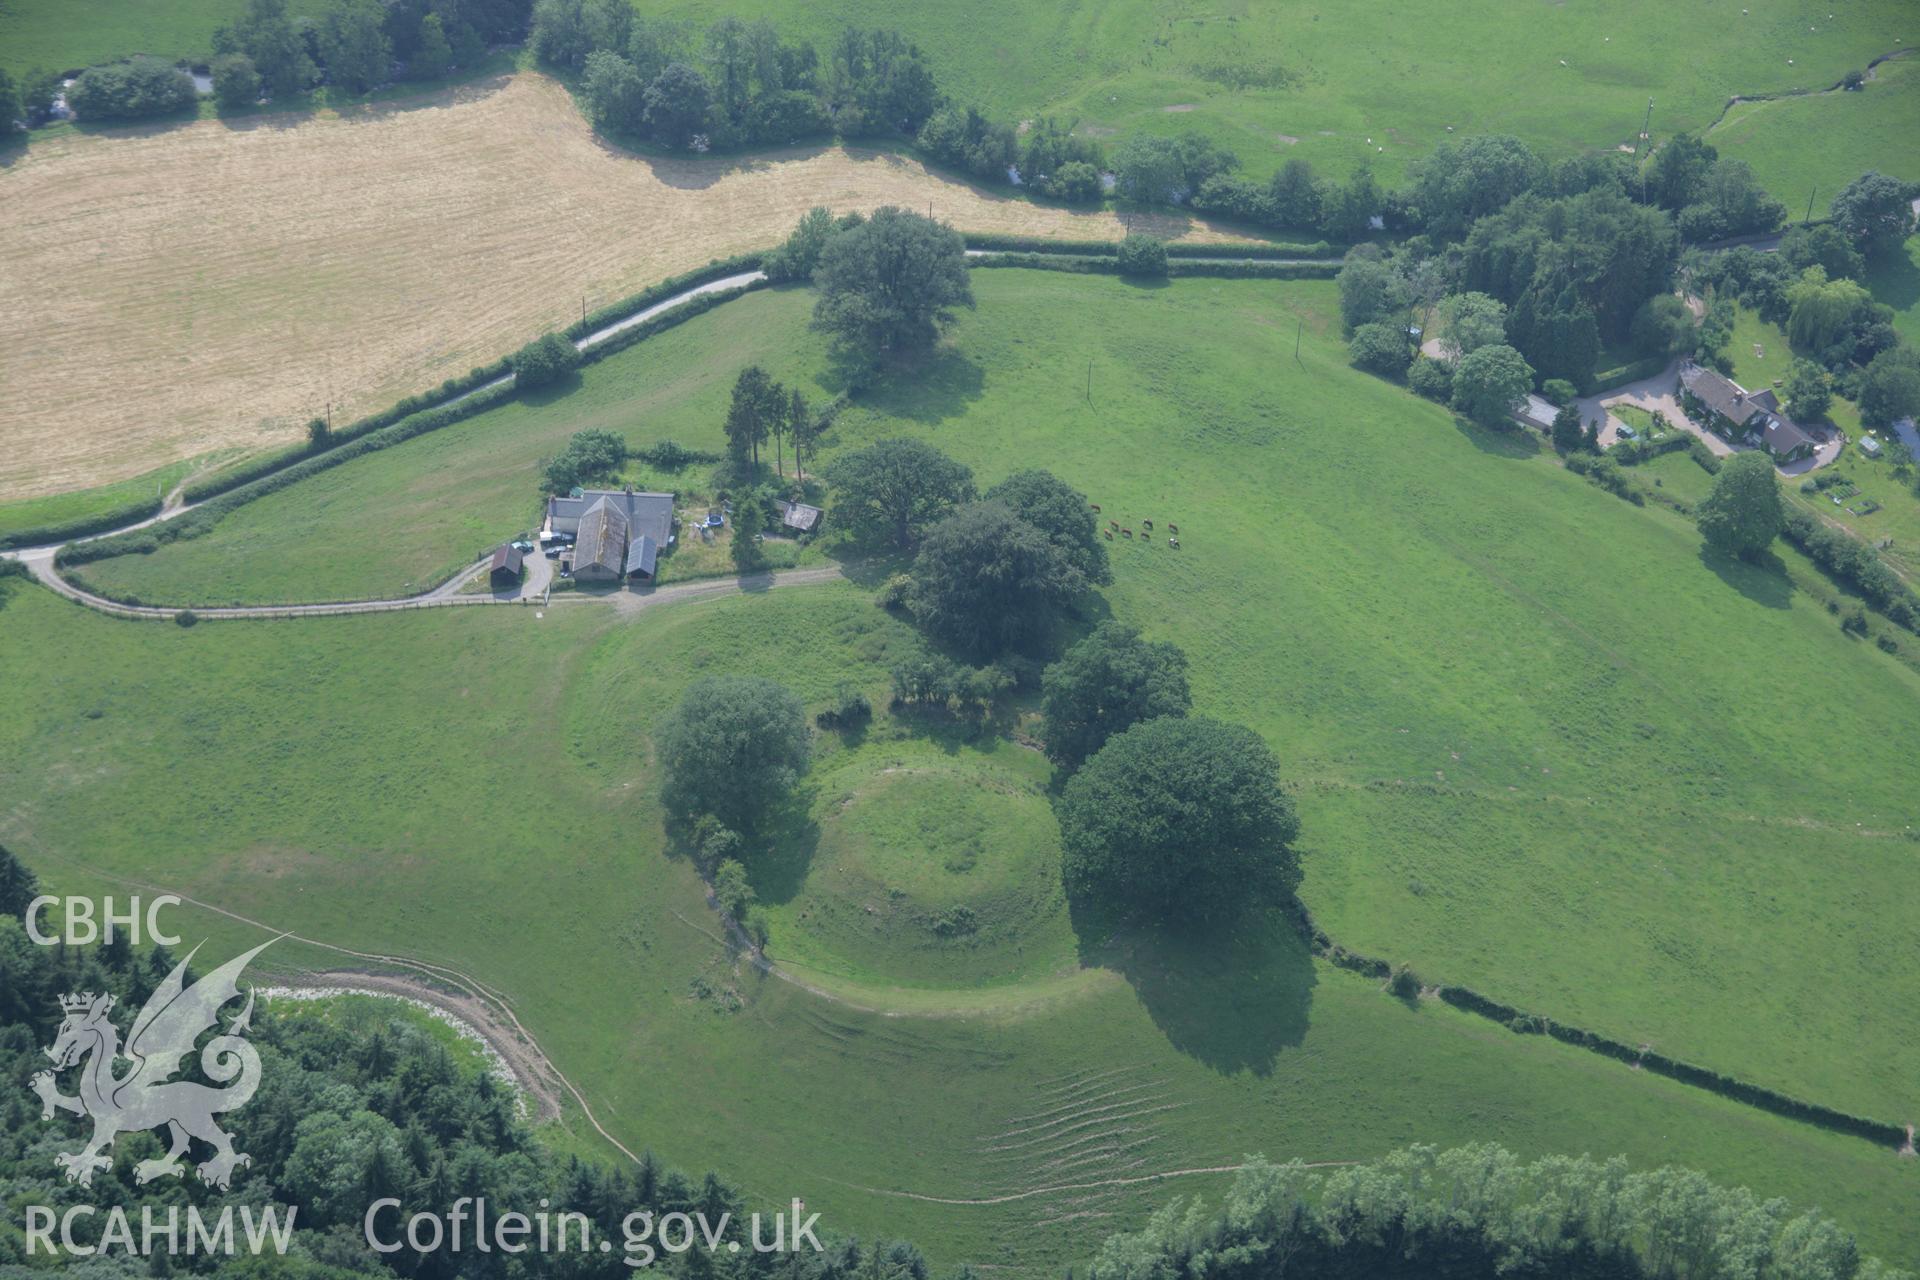 RCAHMW colour oblique aerial photograph of Sycharth Castle, Llansilin. Taken on 04 July 2006 by Toby Driver.